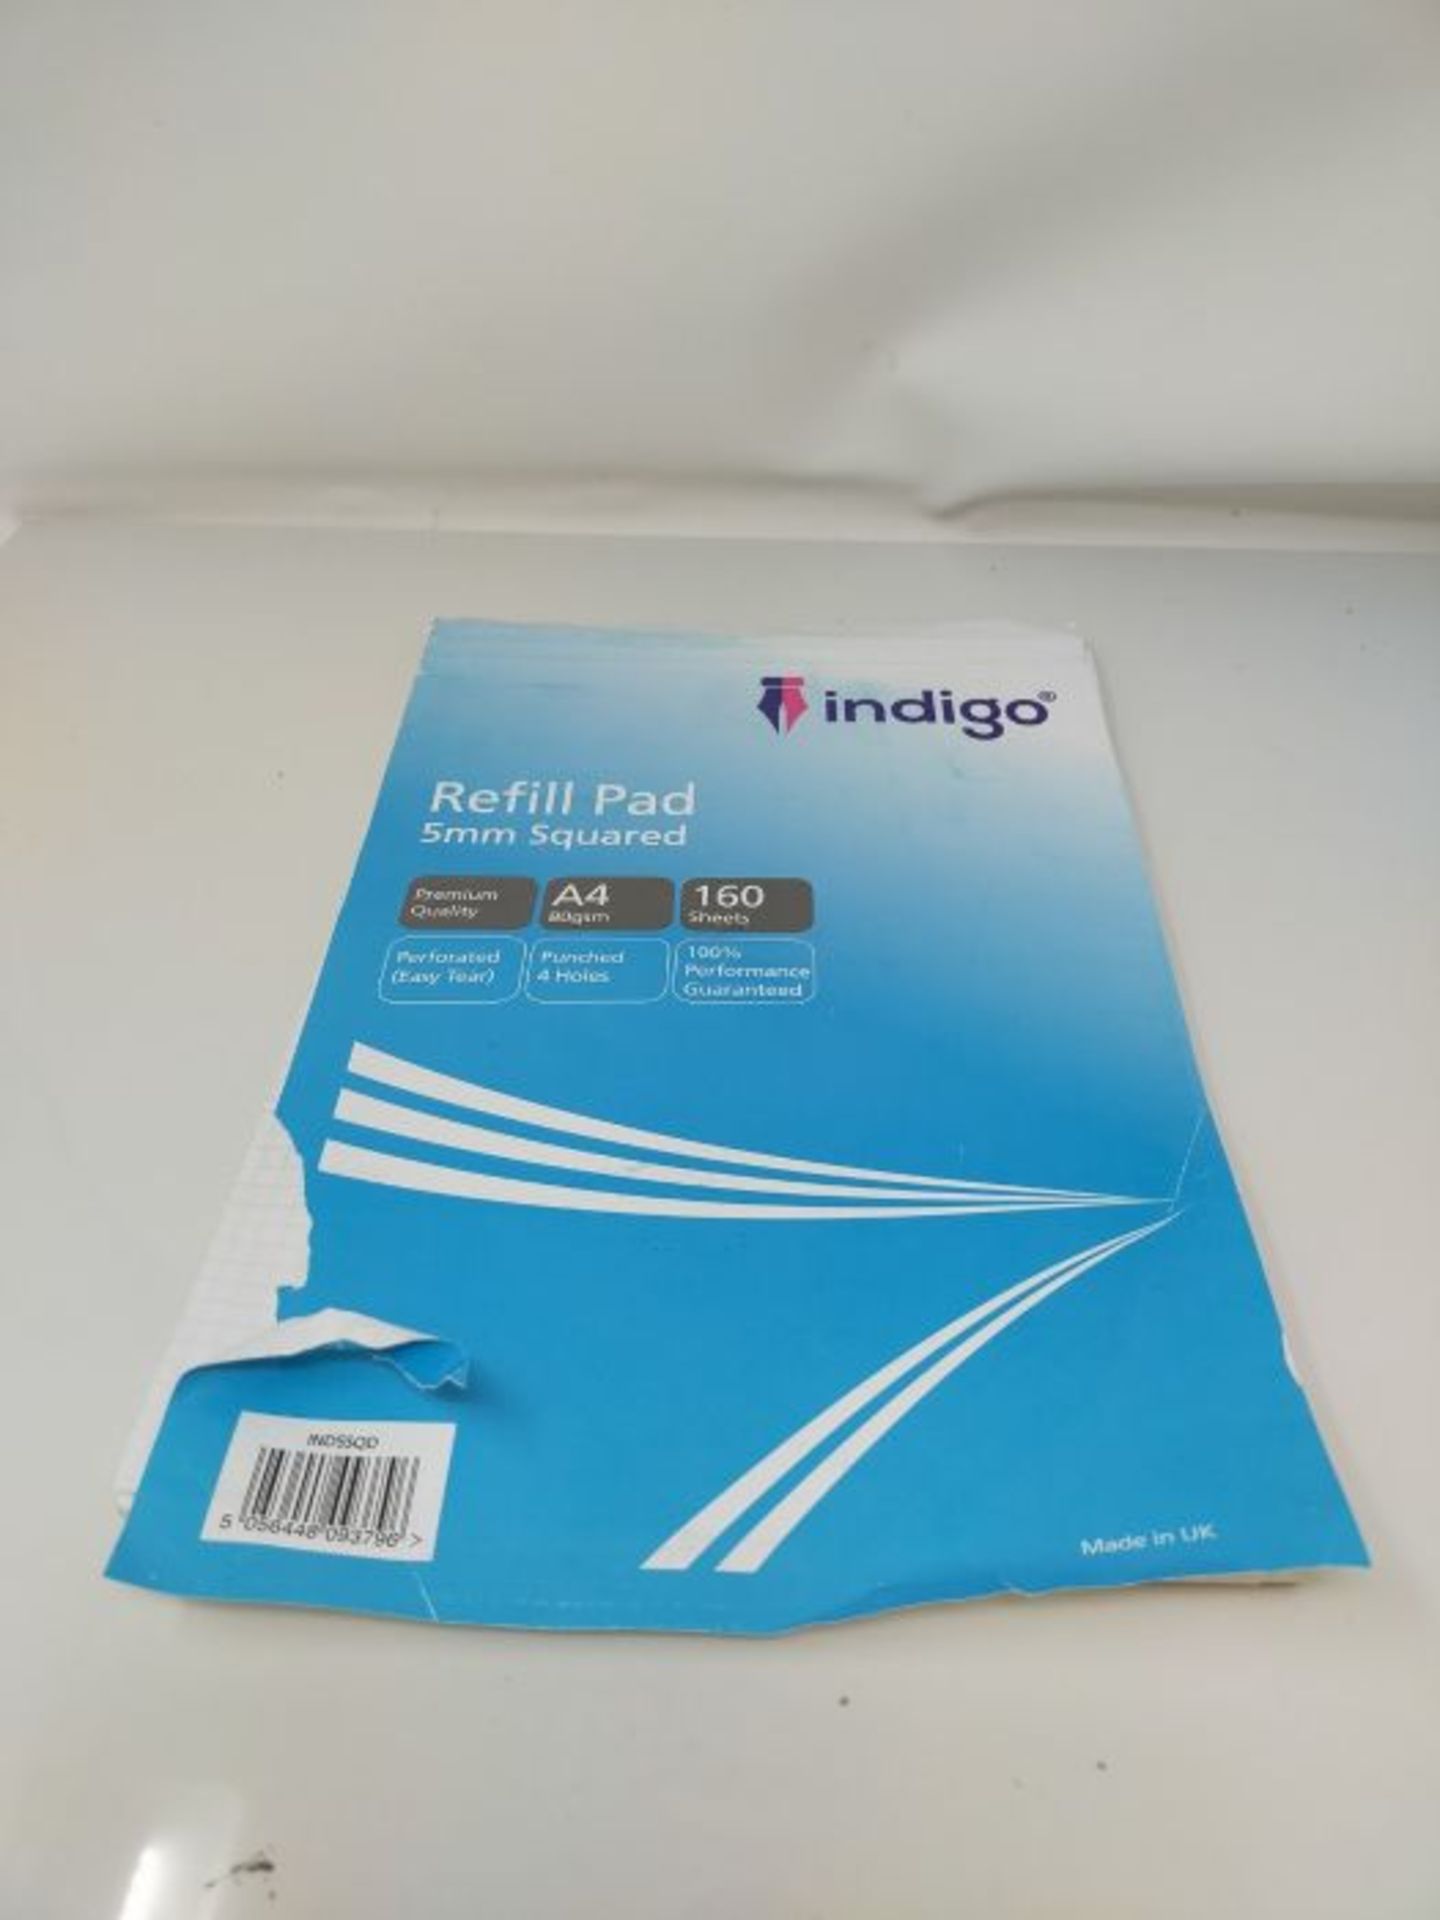 [CRACKED] indigo® A4 Refill Pad 160 Pages Headbound Perforated Punched Hole (Single, - Image 2 of 2